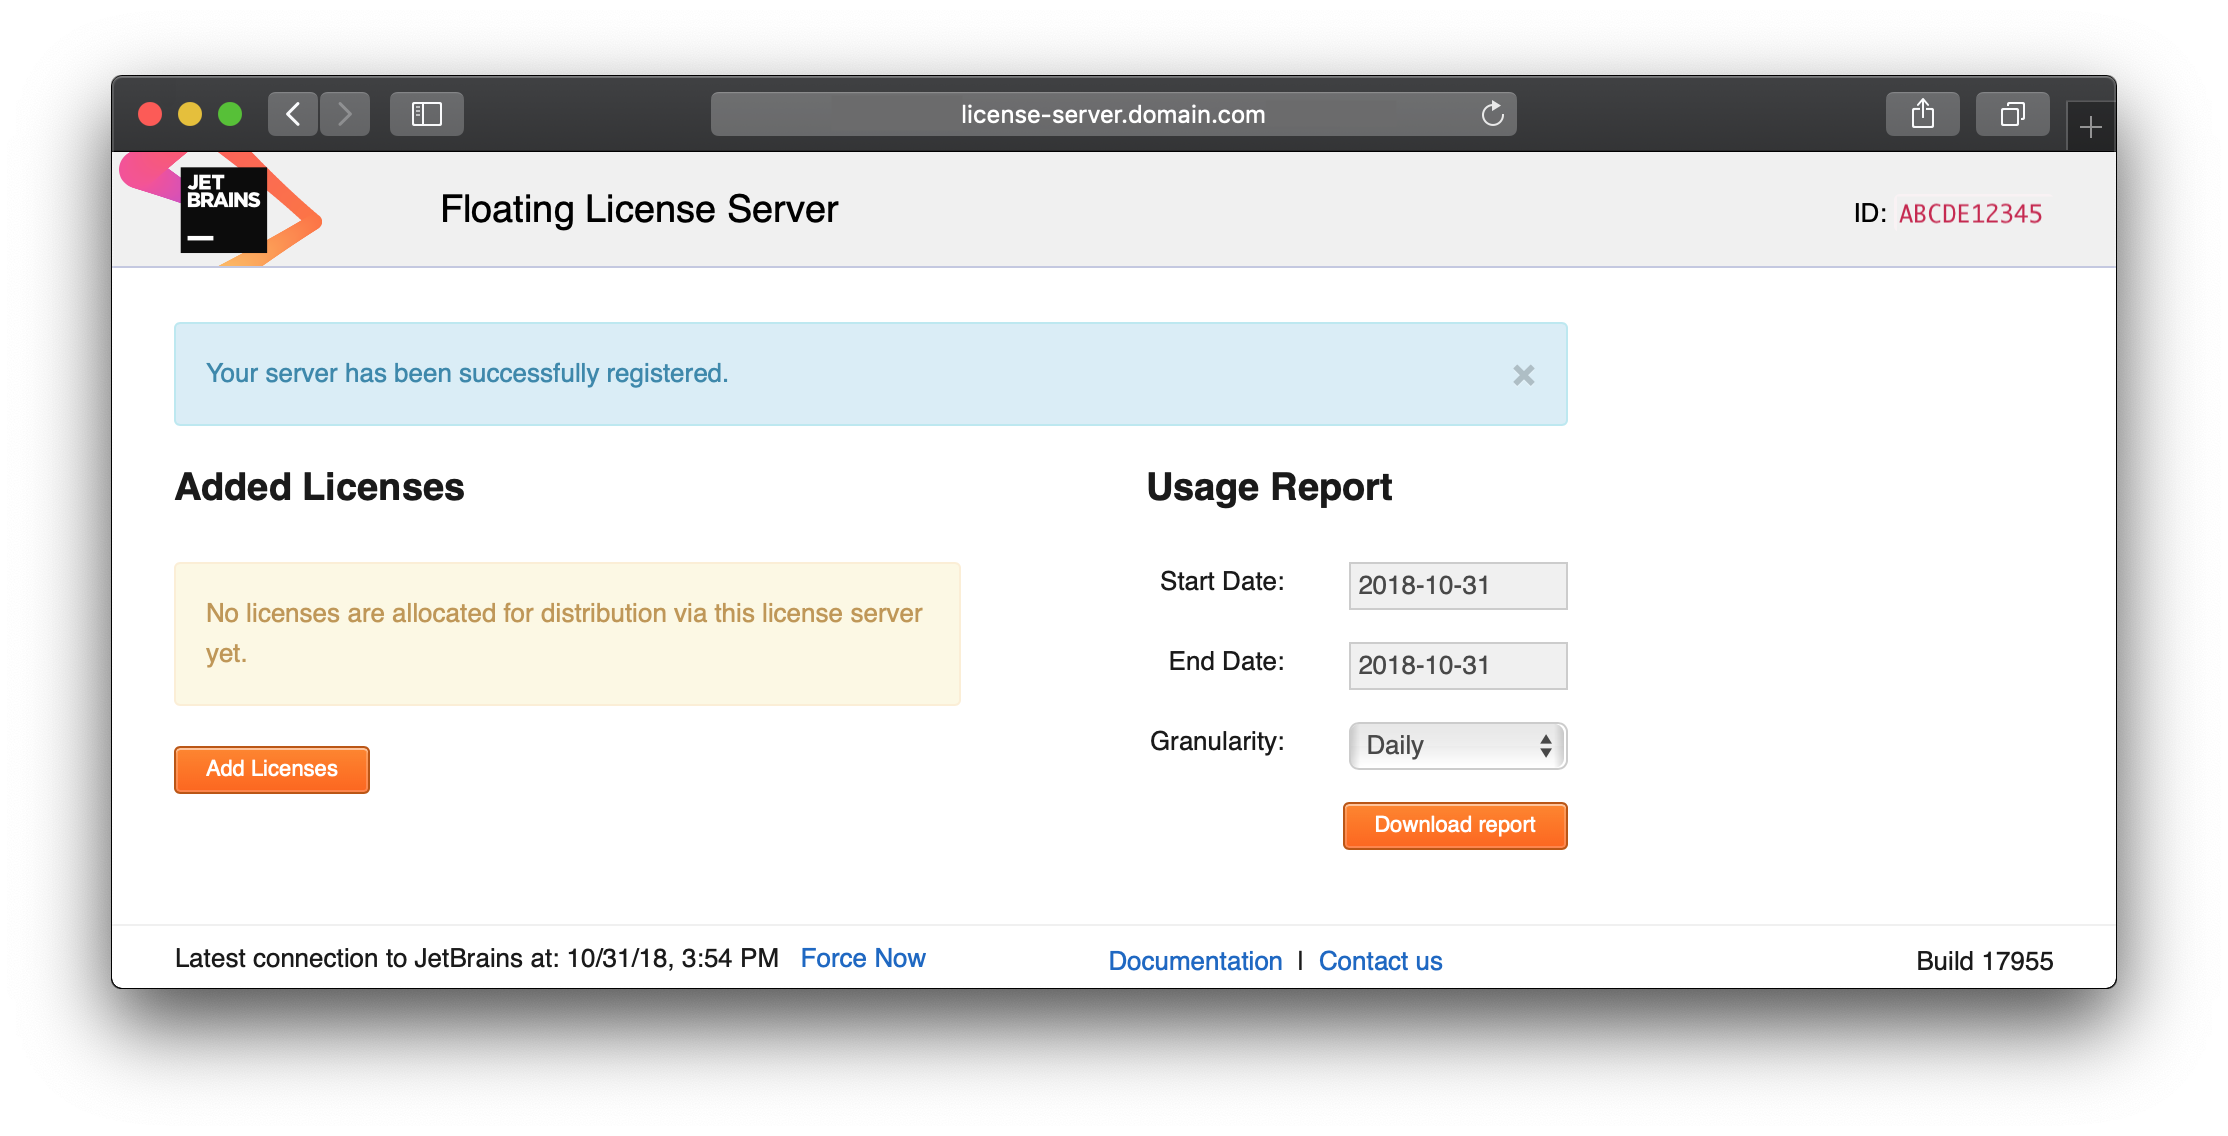 Starting page of registered License Server without any licenses allocated for it